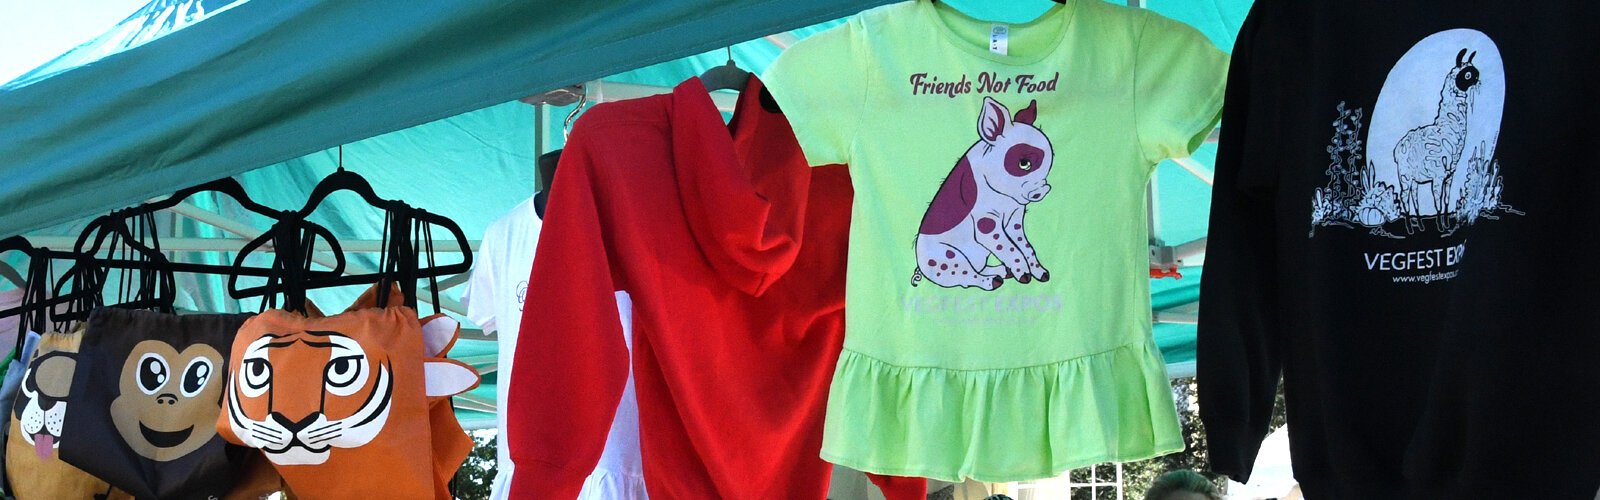 Promoting ethical veganism that makes a difference in the lives of humans and the animals and in saving the planet, VegFest made the slogan “Friends not food” ubiquitous.